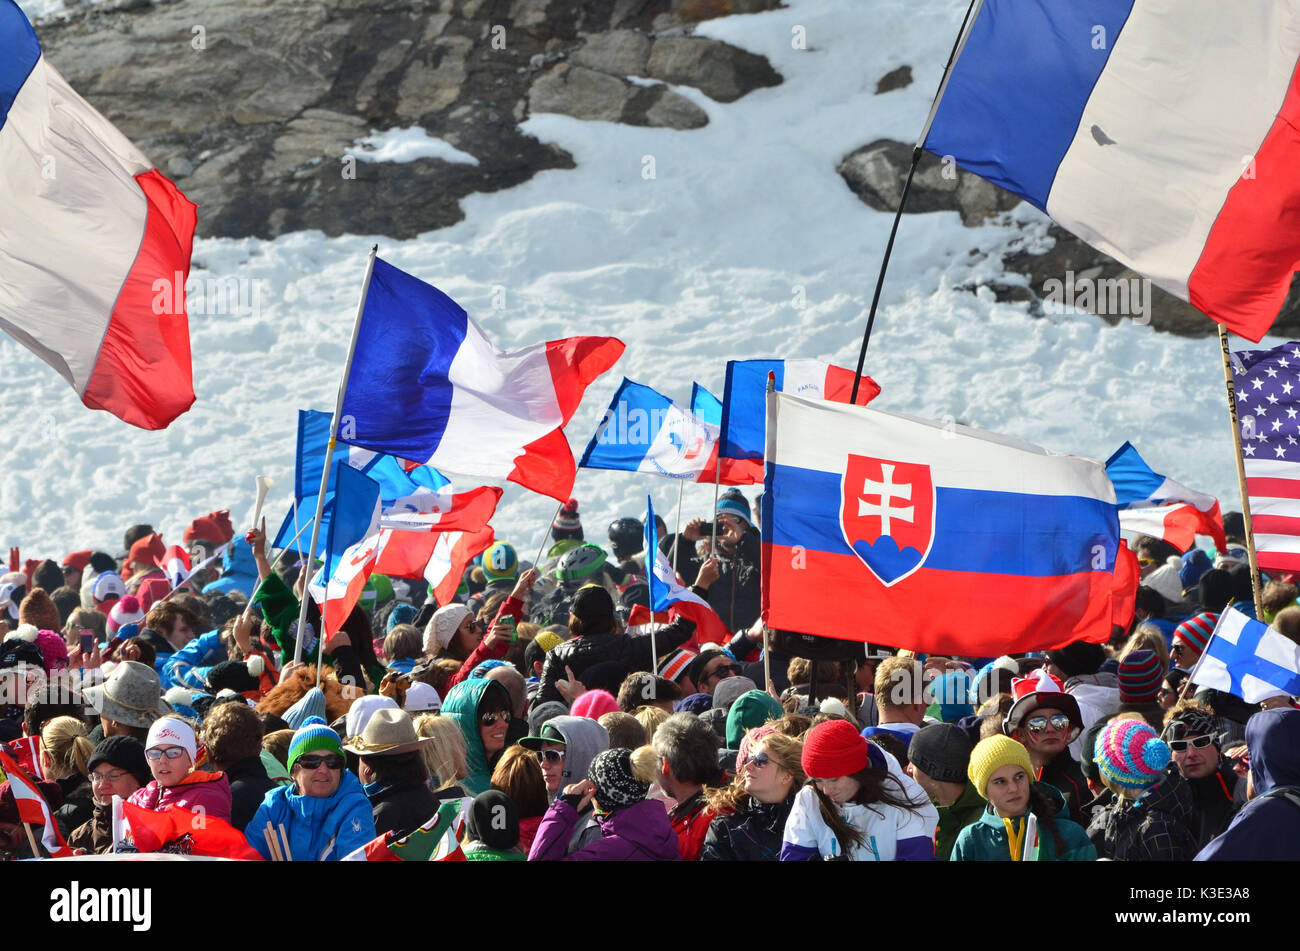 Skiing, ski race, ski world cup, supporters' club, flags, Stock Photo